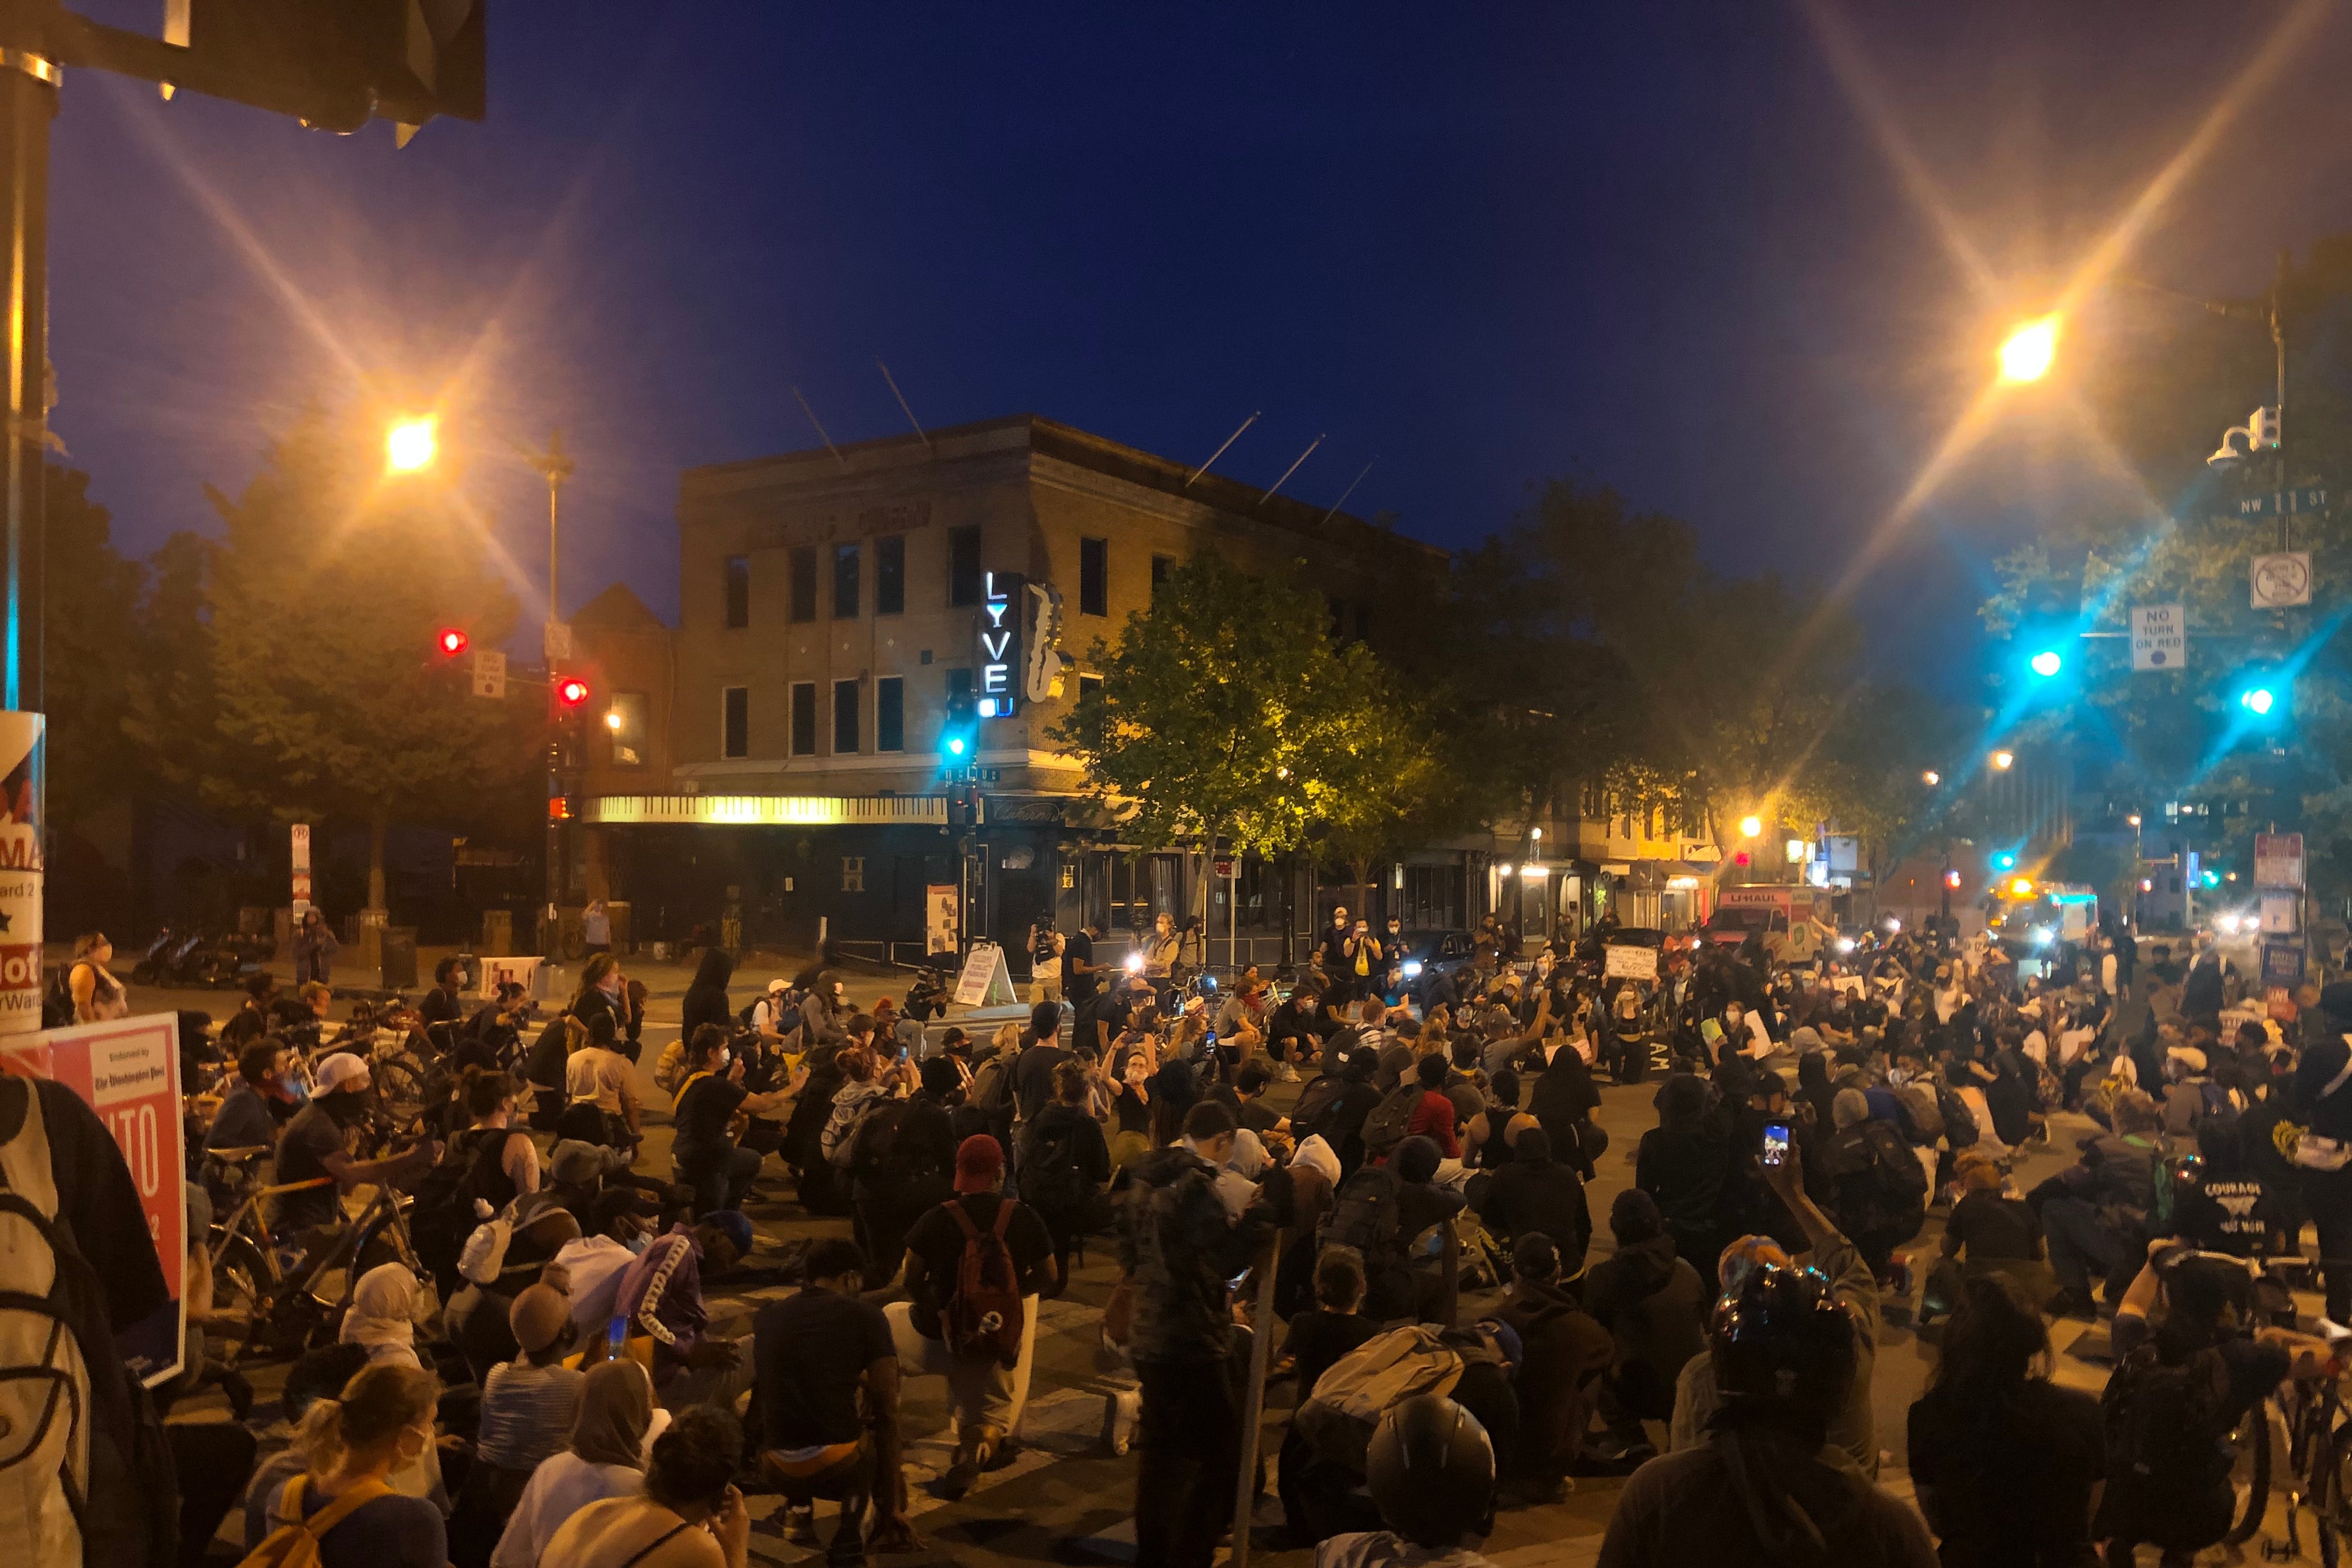 A large crowd of protestors kneel at an intersection in D.C.